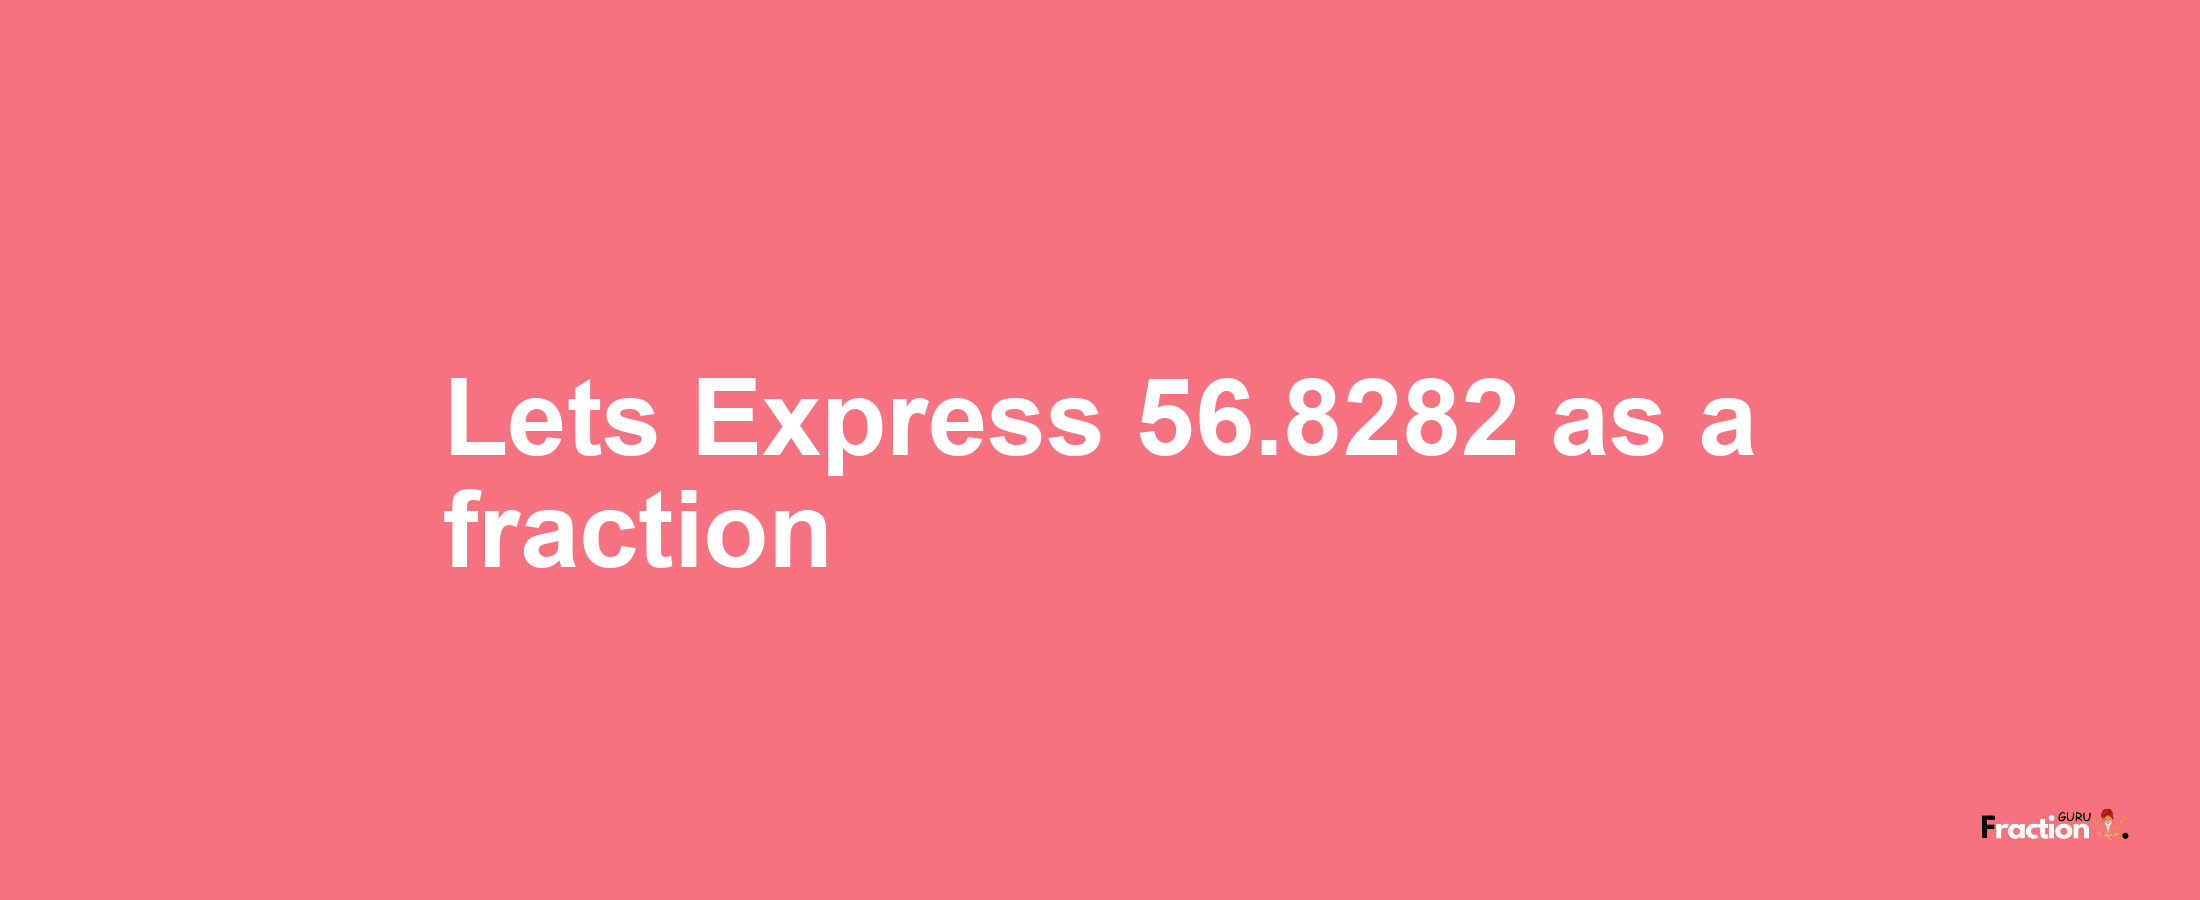 Lets Express 56.8282 as afraction